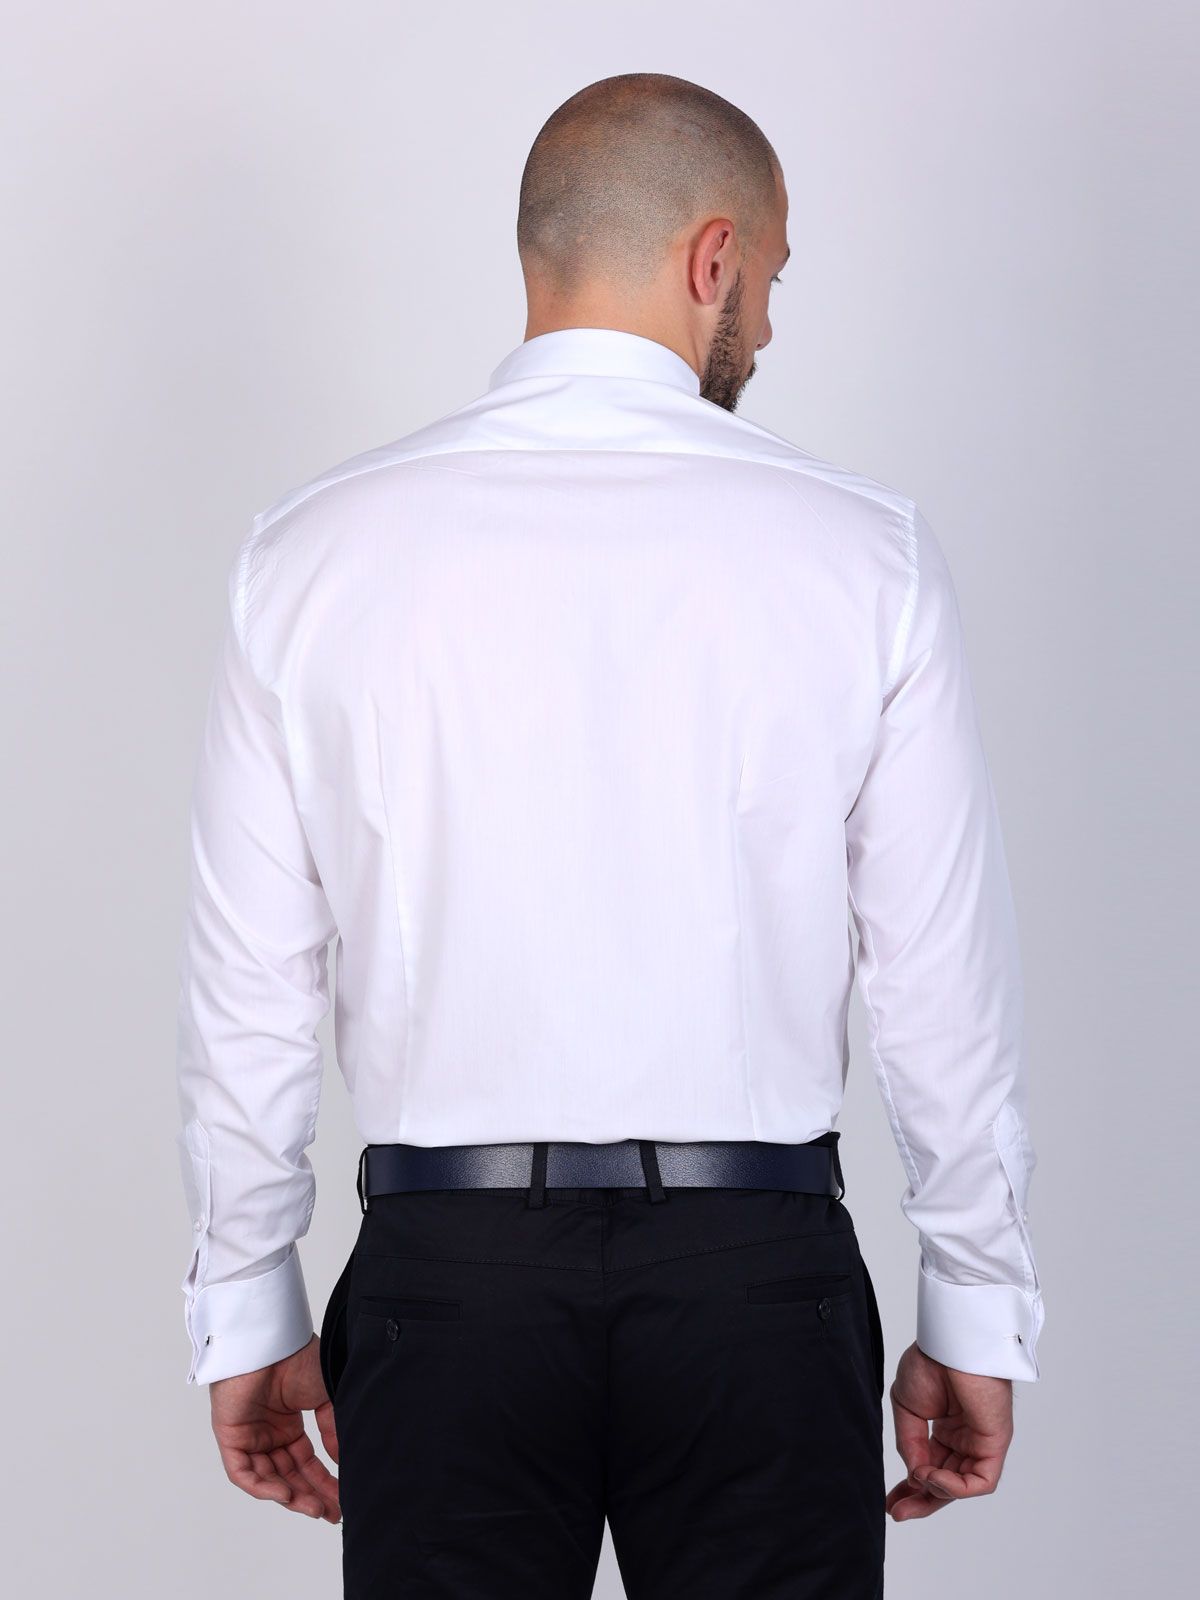 Bow tie shirt in white - 21541 € 48.37 img2